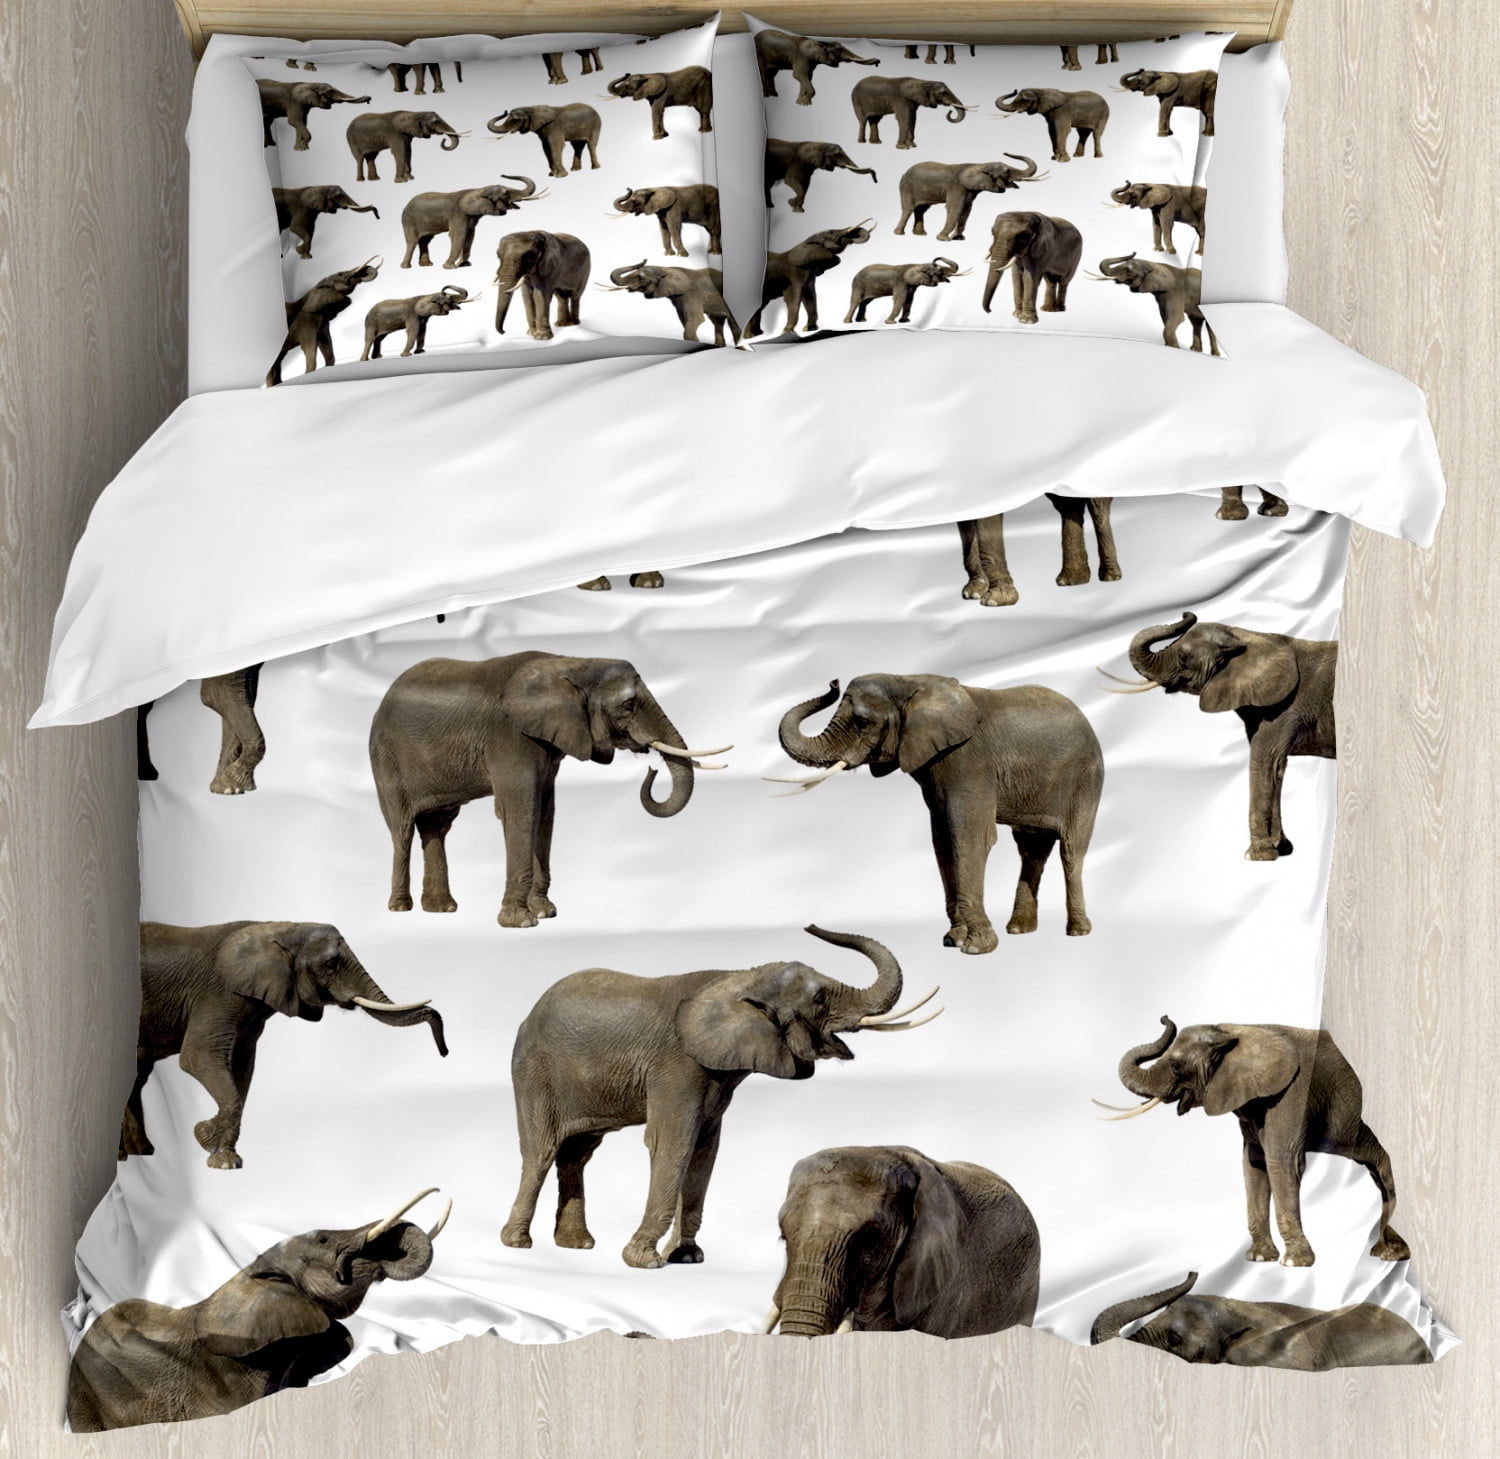 DUVET COVER 2PC TO FIT JUNIOR BED BABY BEDDING SET PILLOWCASE Jungle